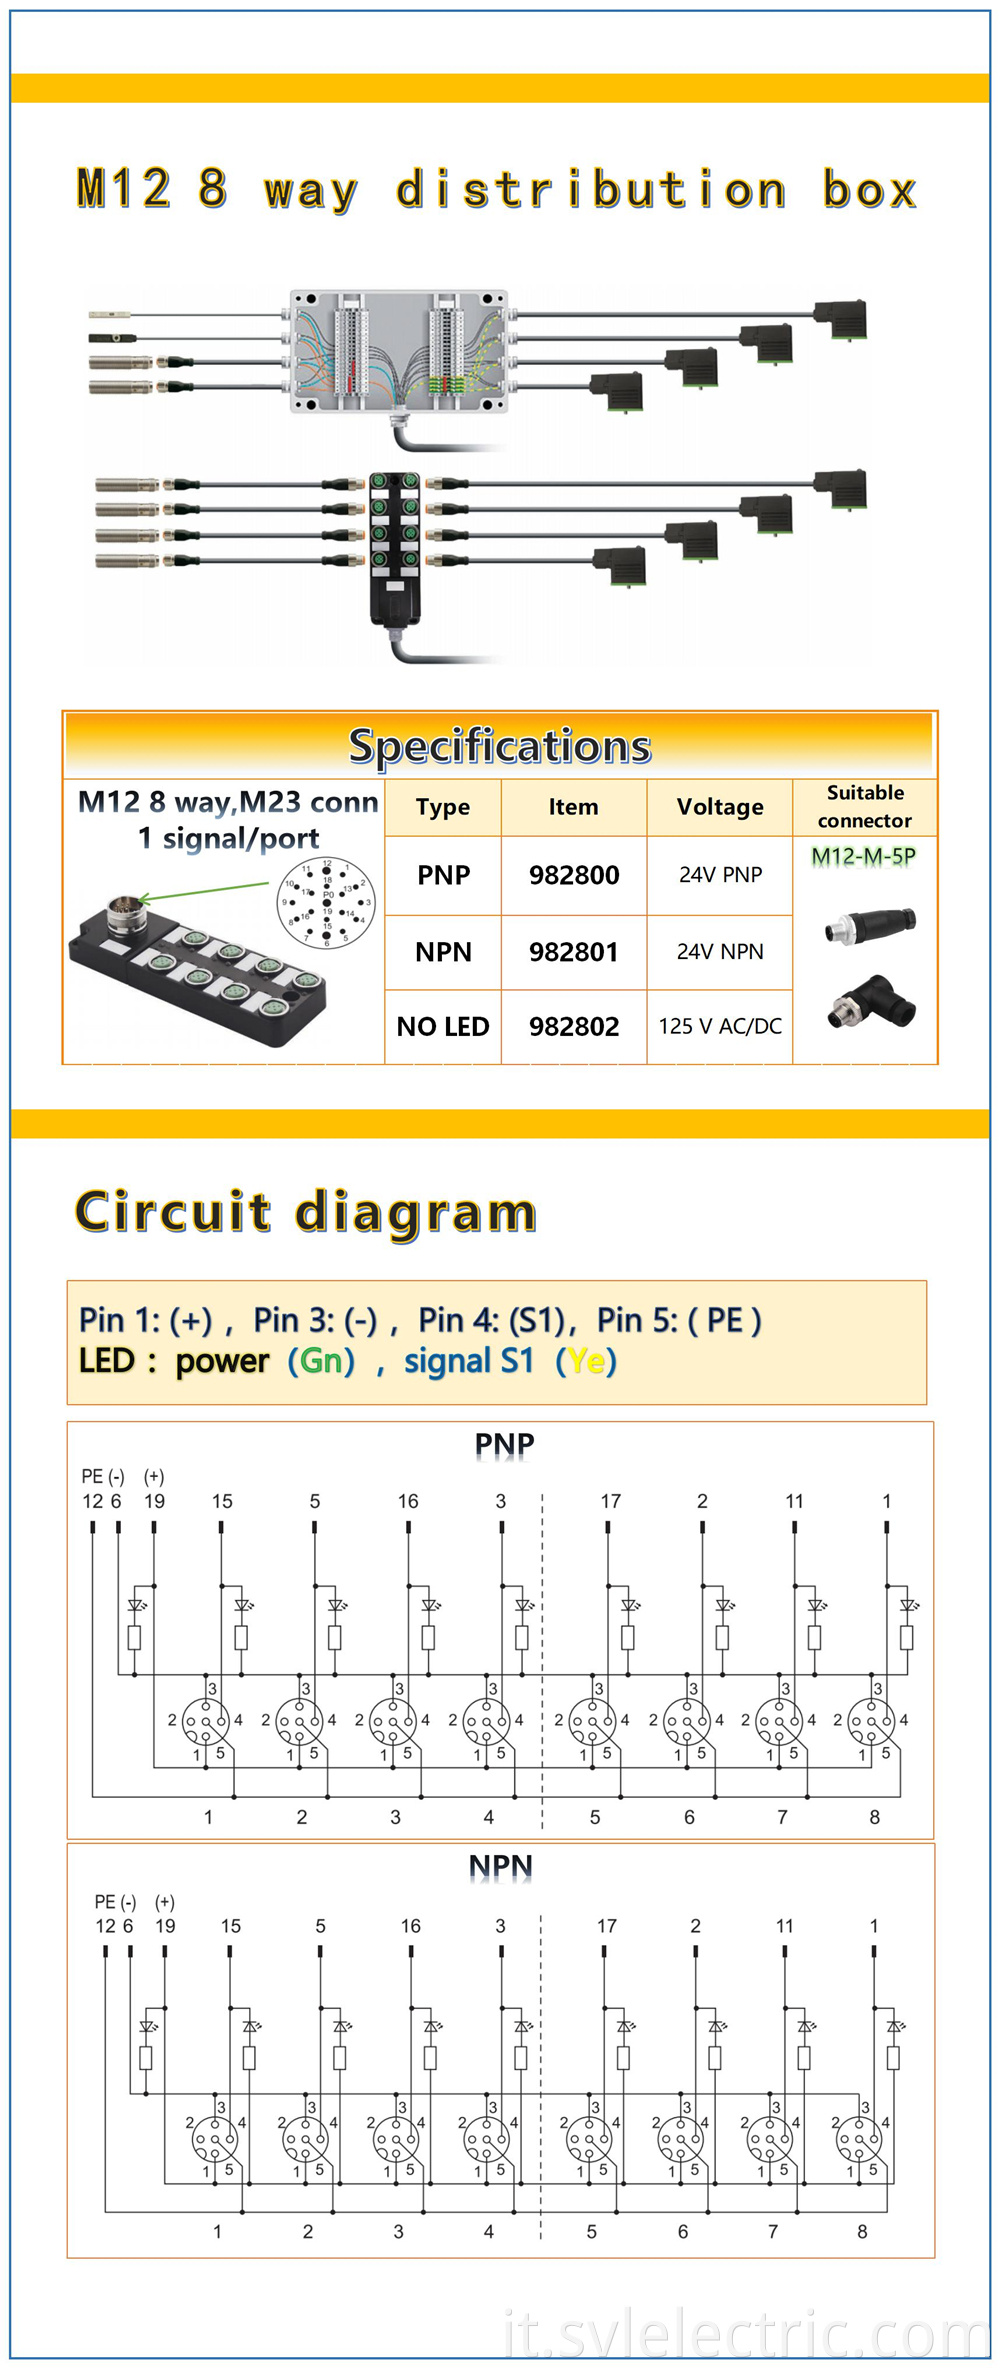 M12 8 way distribution box specifications